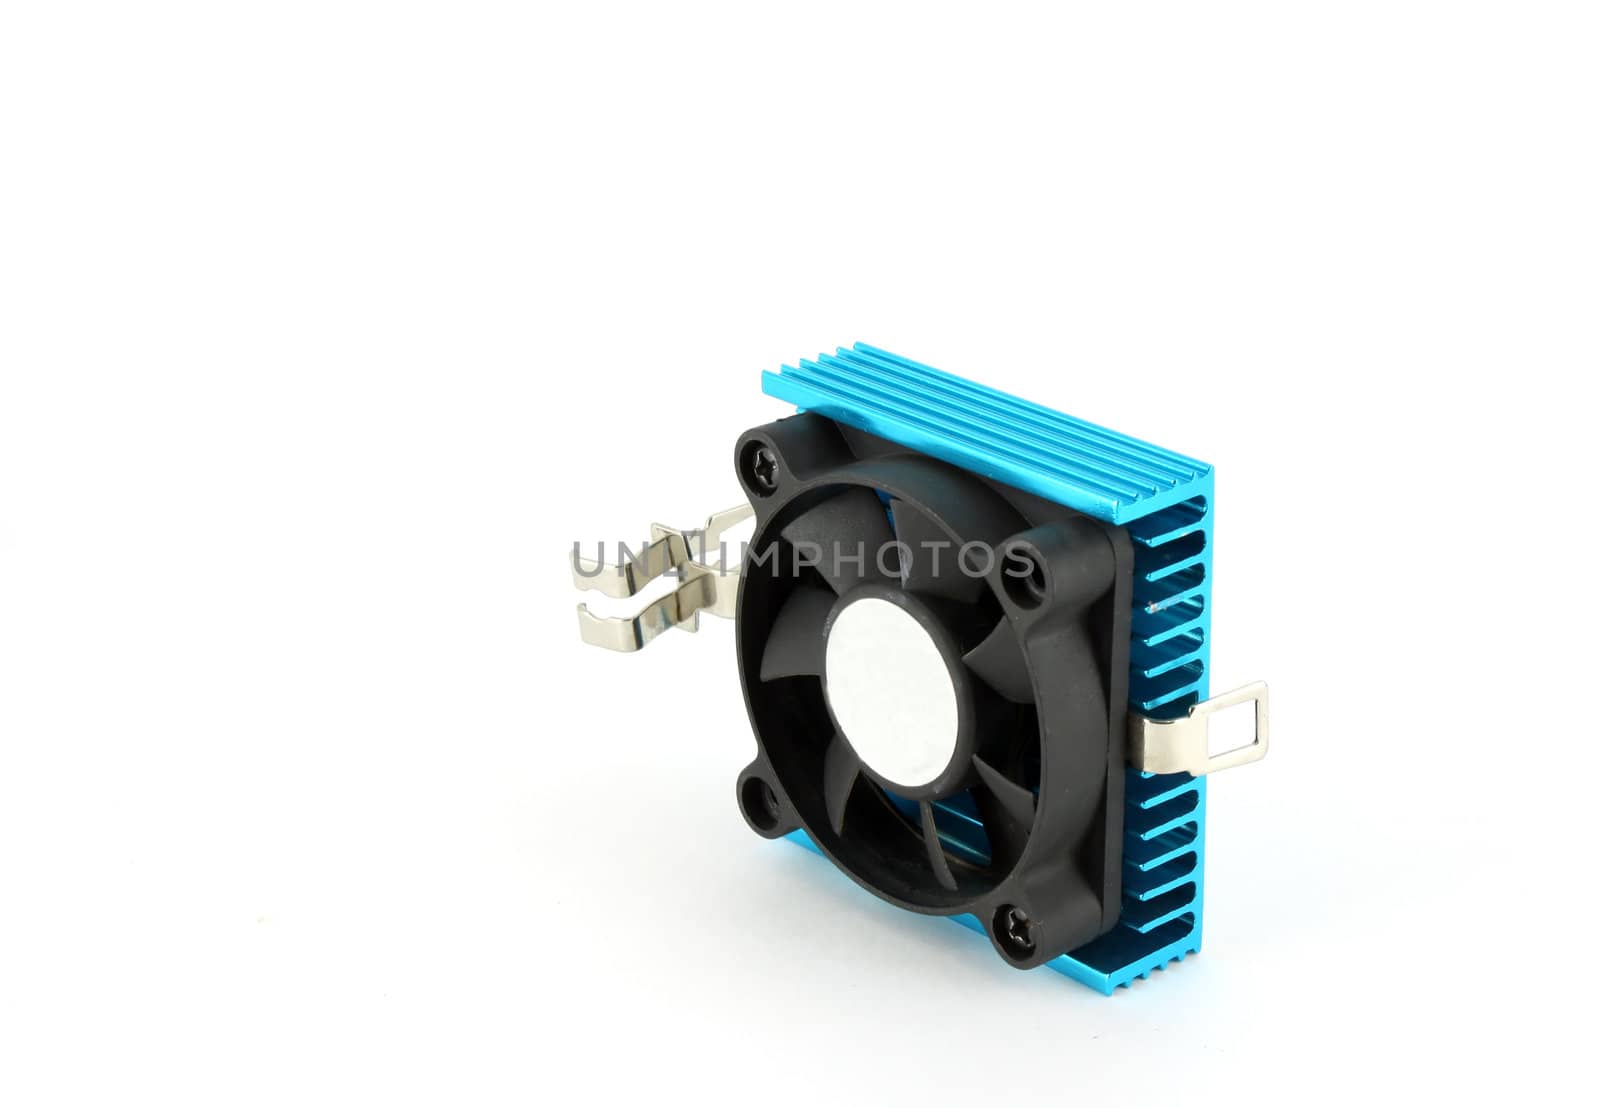 Small fan for microprocessor and radiator